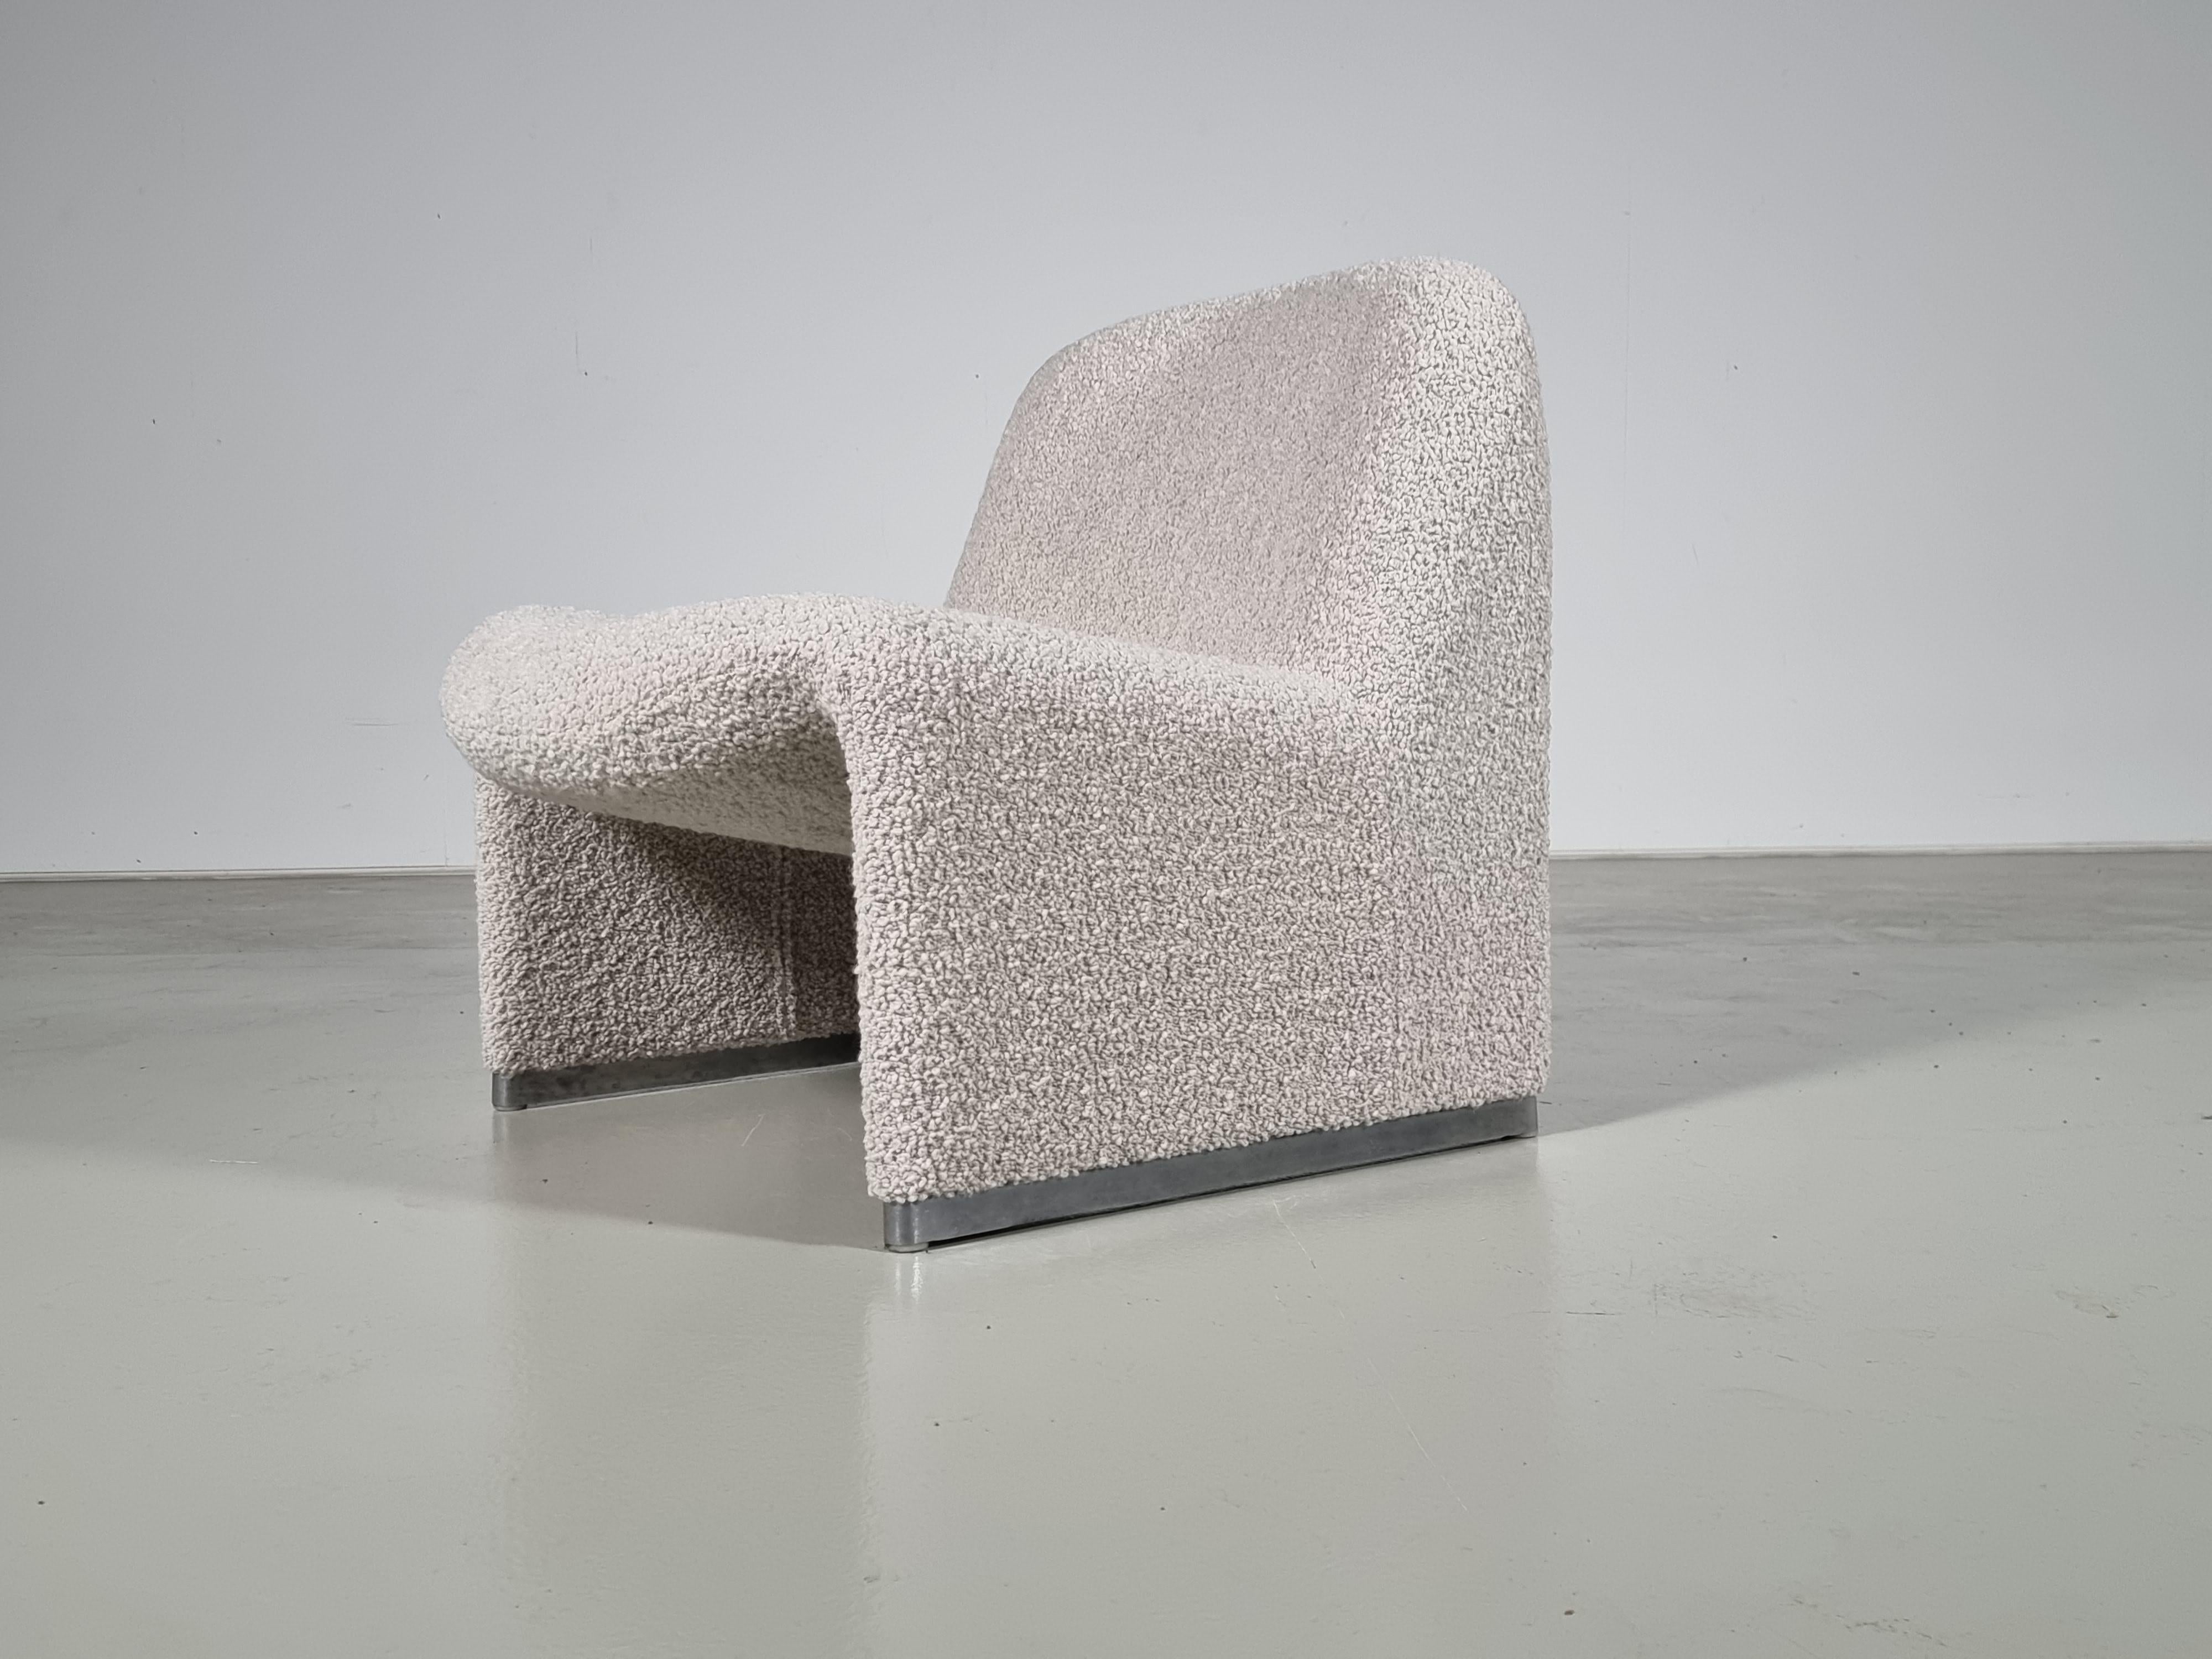 Alky chair by Giancarlo Piretti for Castelli, 1970s. Reupholstered in a beautiful beige high-quality nimbus boucle by Dedar. Aluminum frame and polished chrome footrests. Beautiful organic curves are reminiscent of Pierre Paulin's designs.